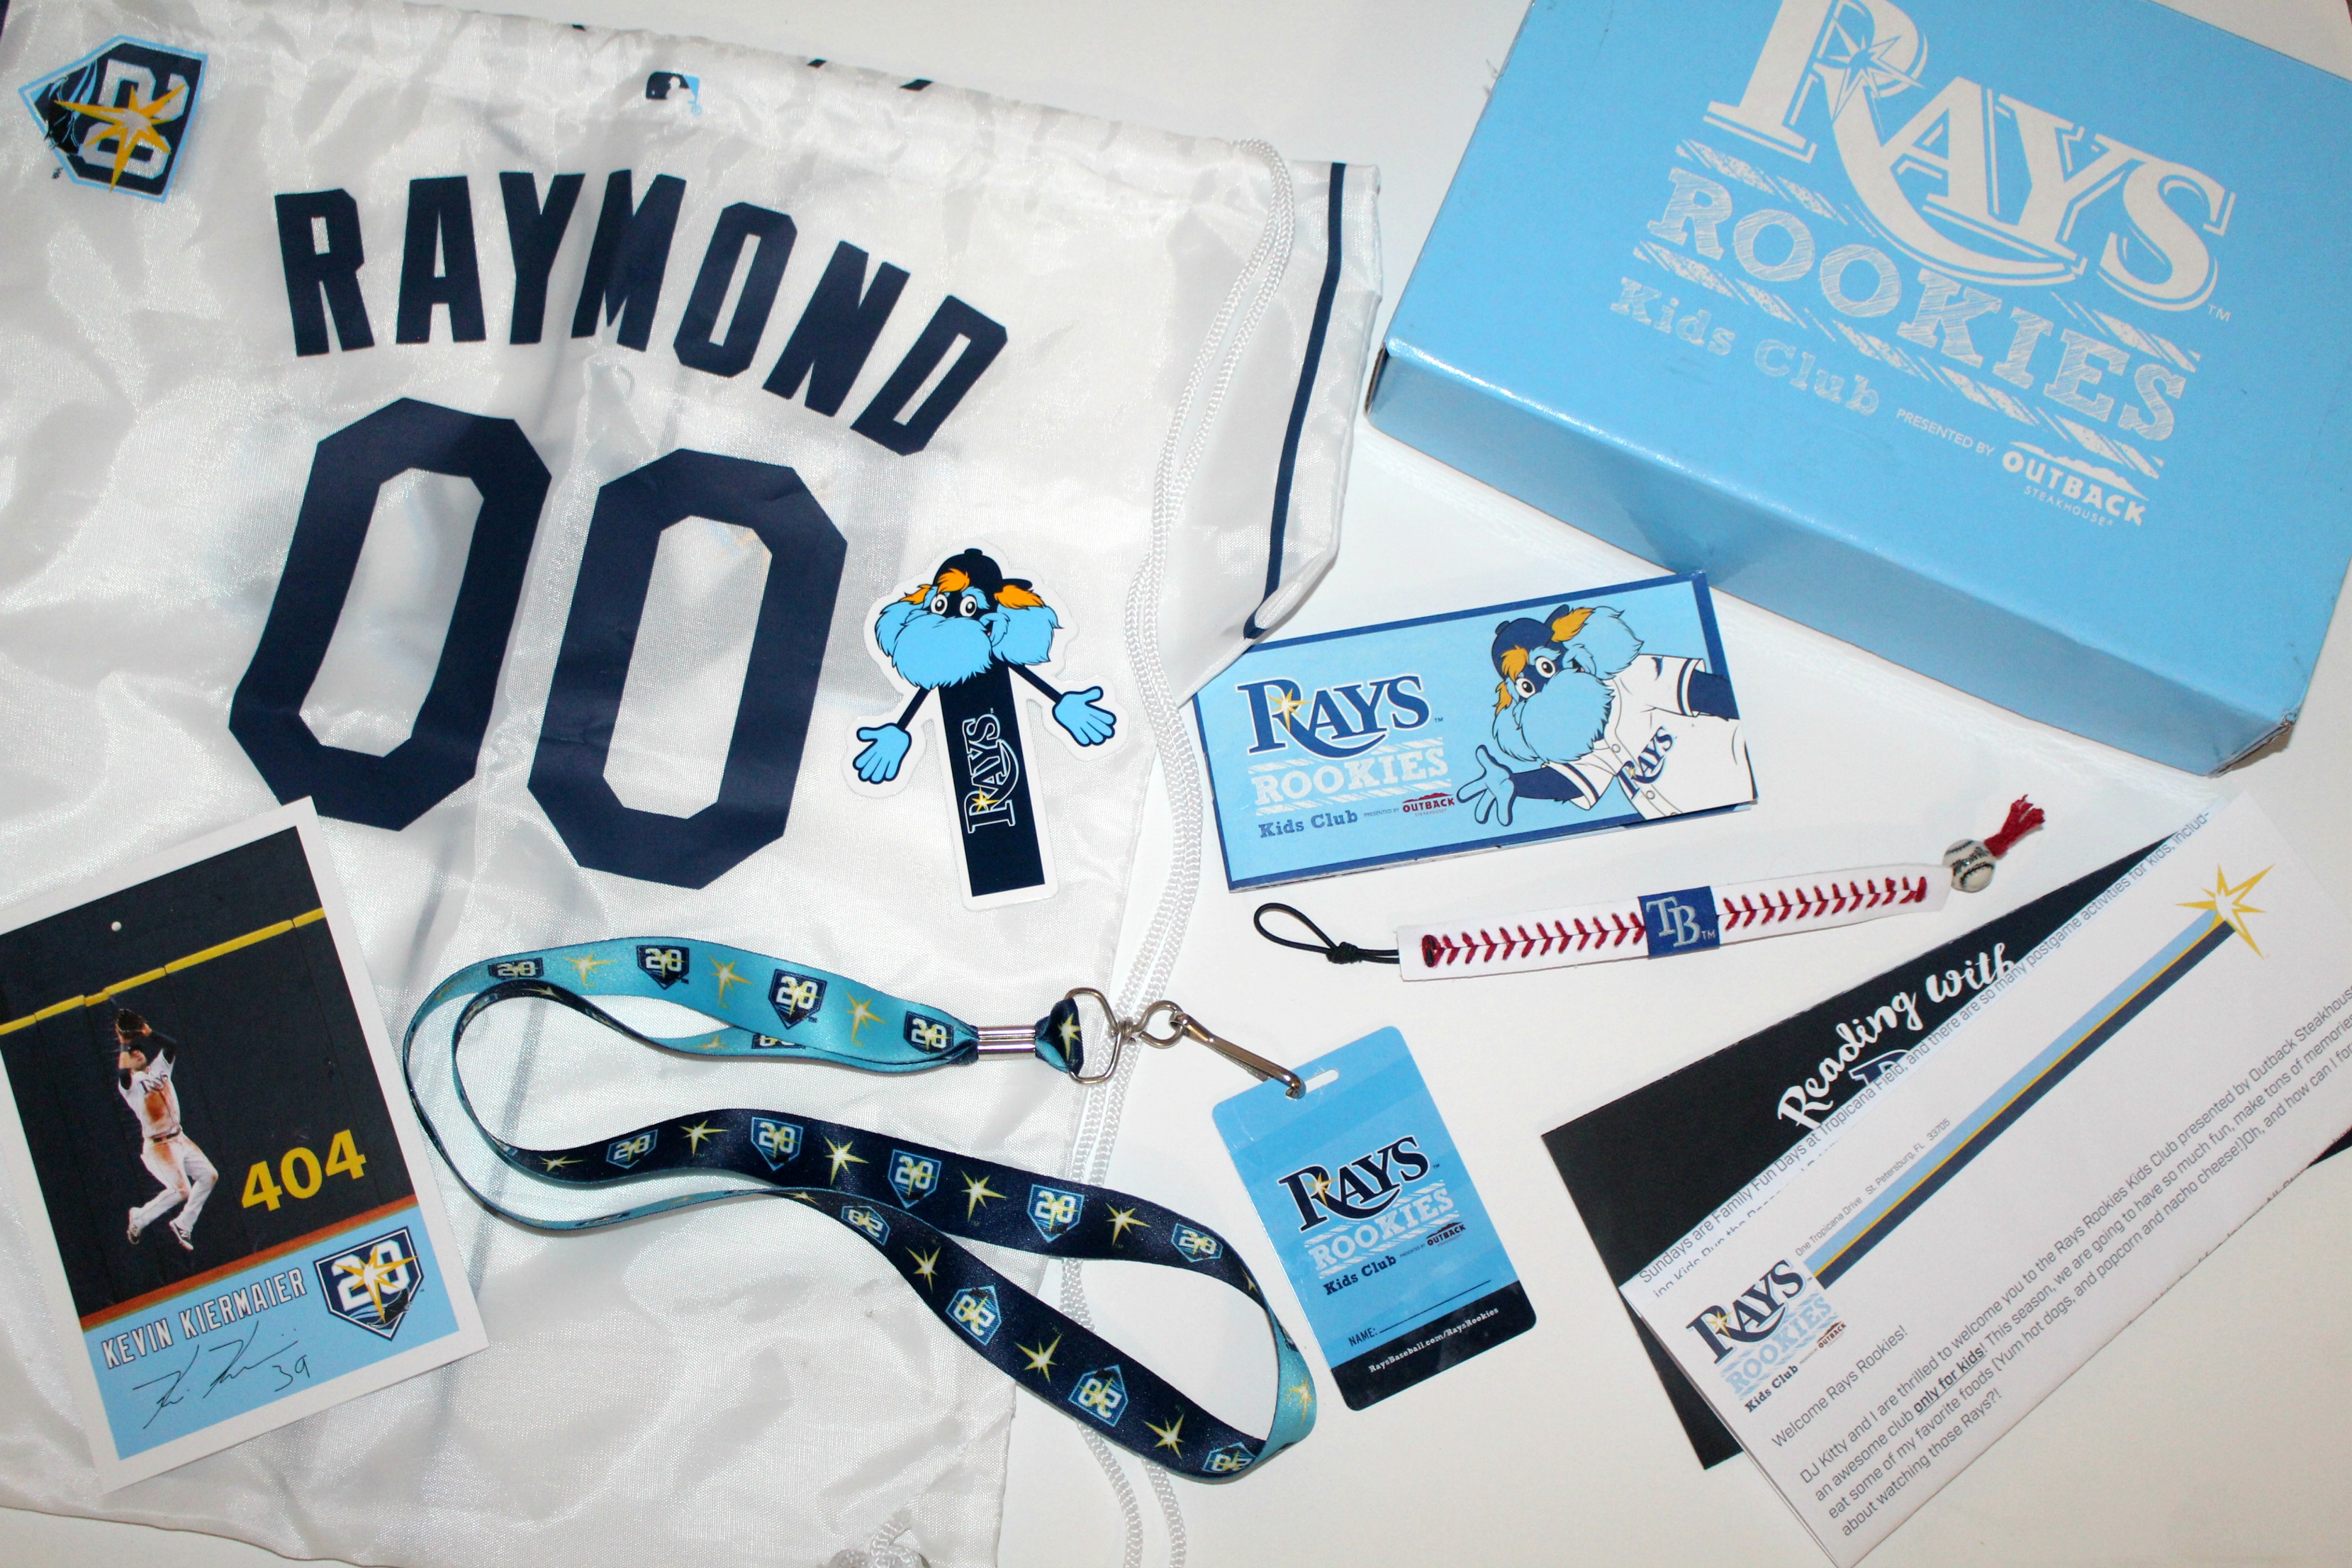 Tampa Bay Rays Rookies Kids Club for Little Rays Fans!